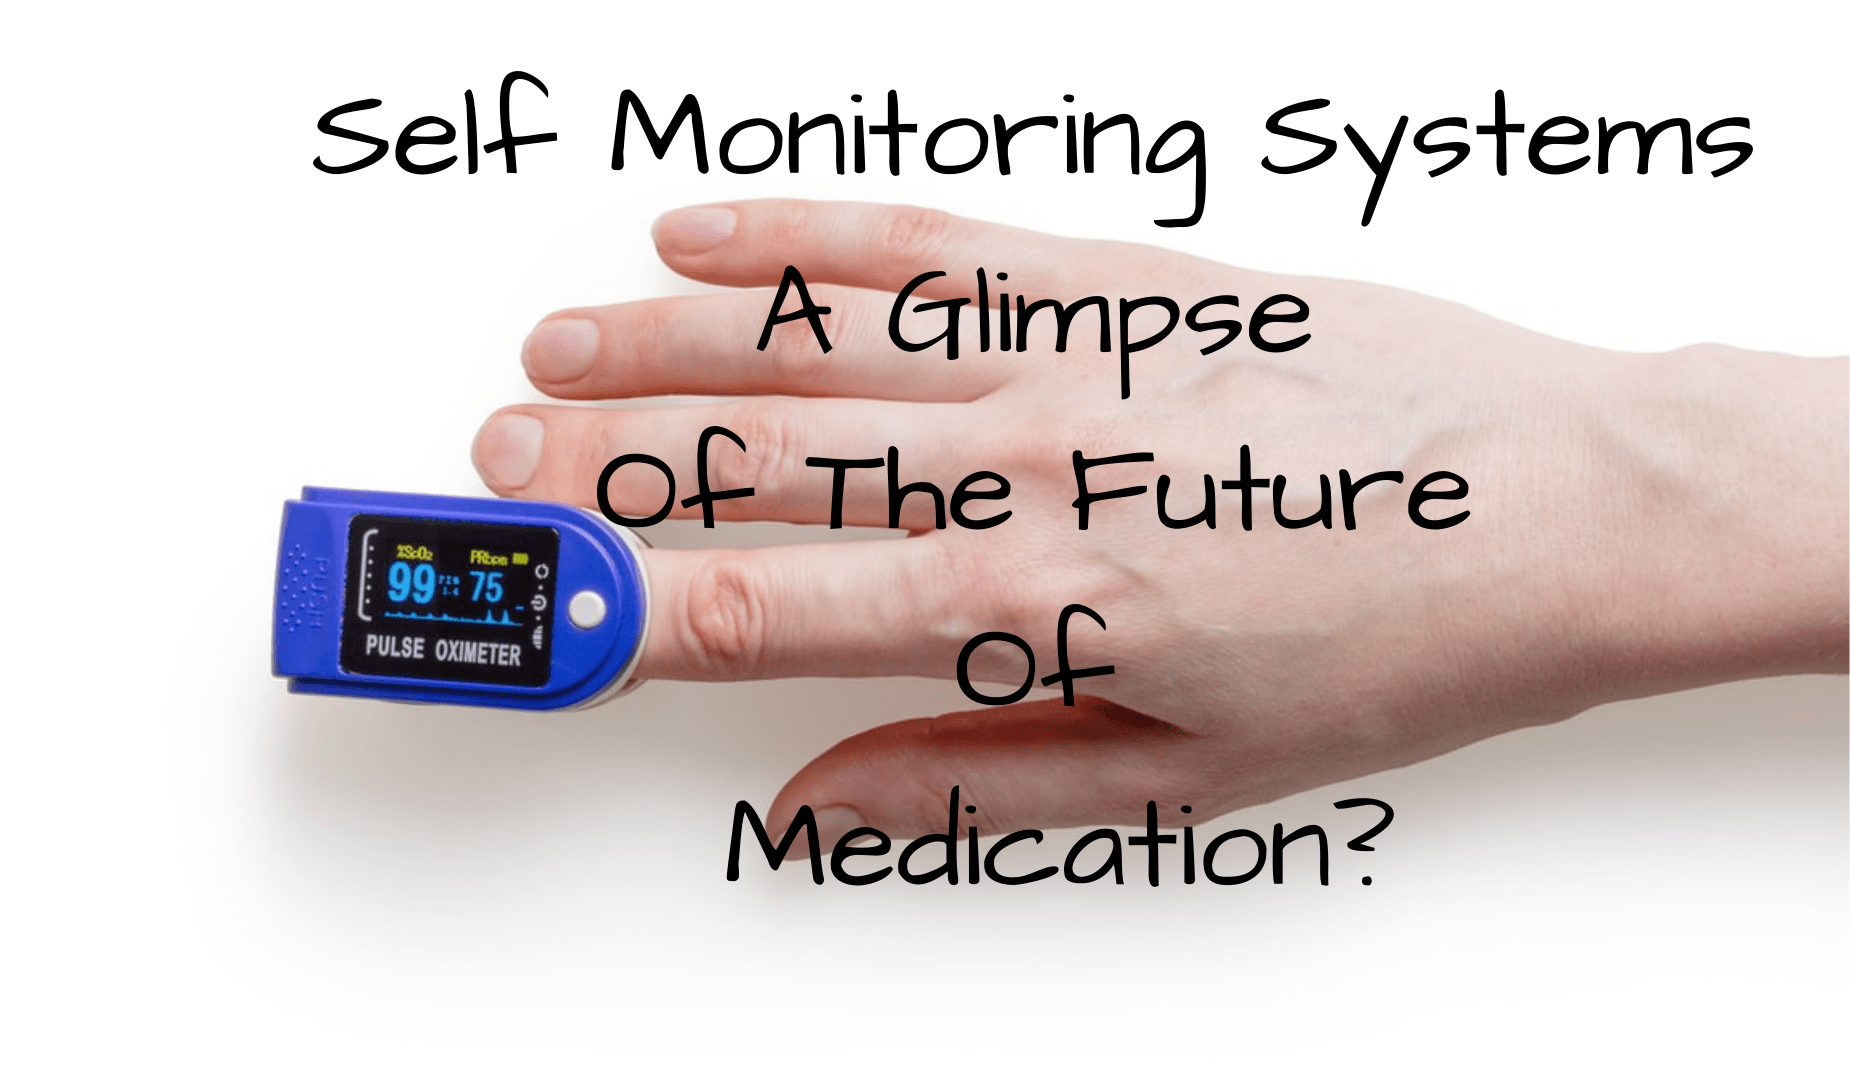 Self Monitoring Systems - A Glimpse Of The Future Of Medication?